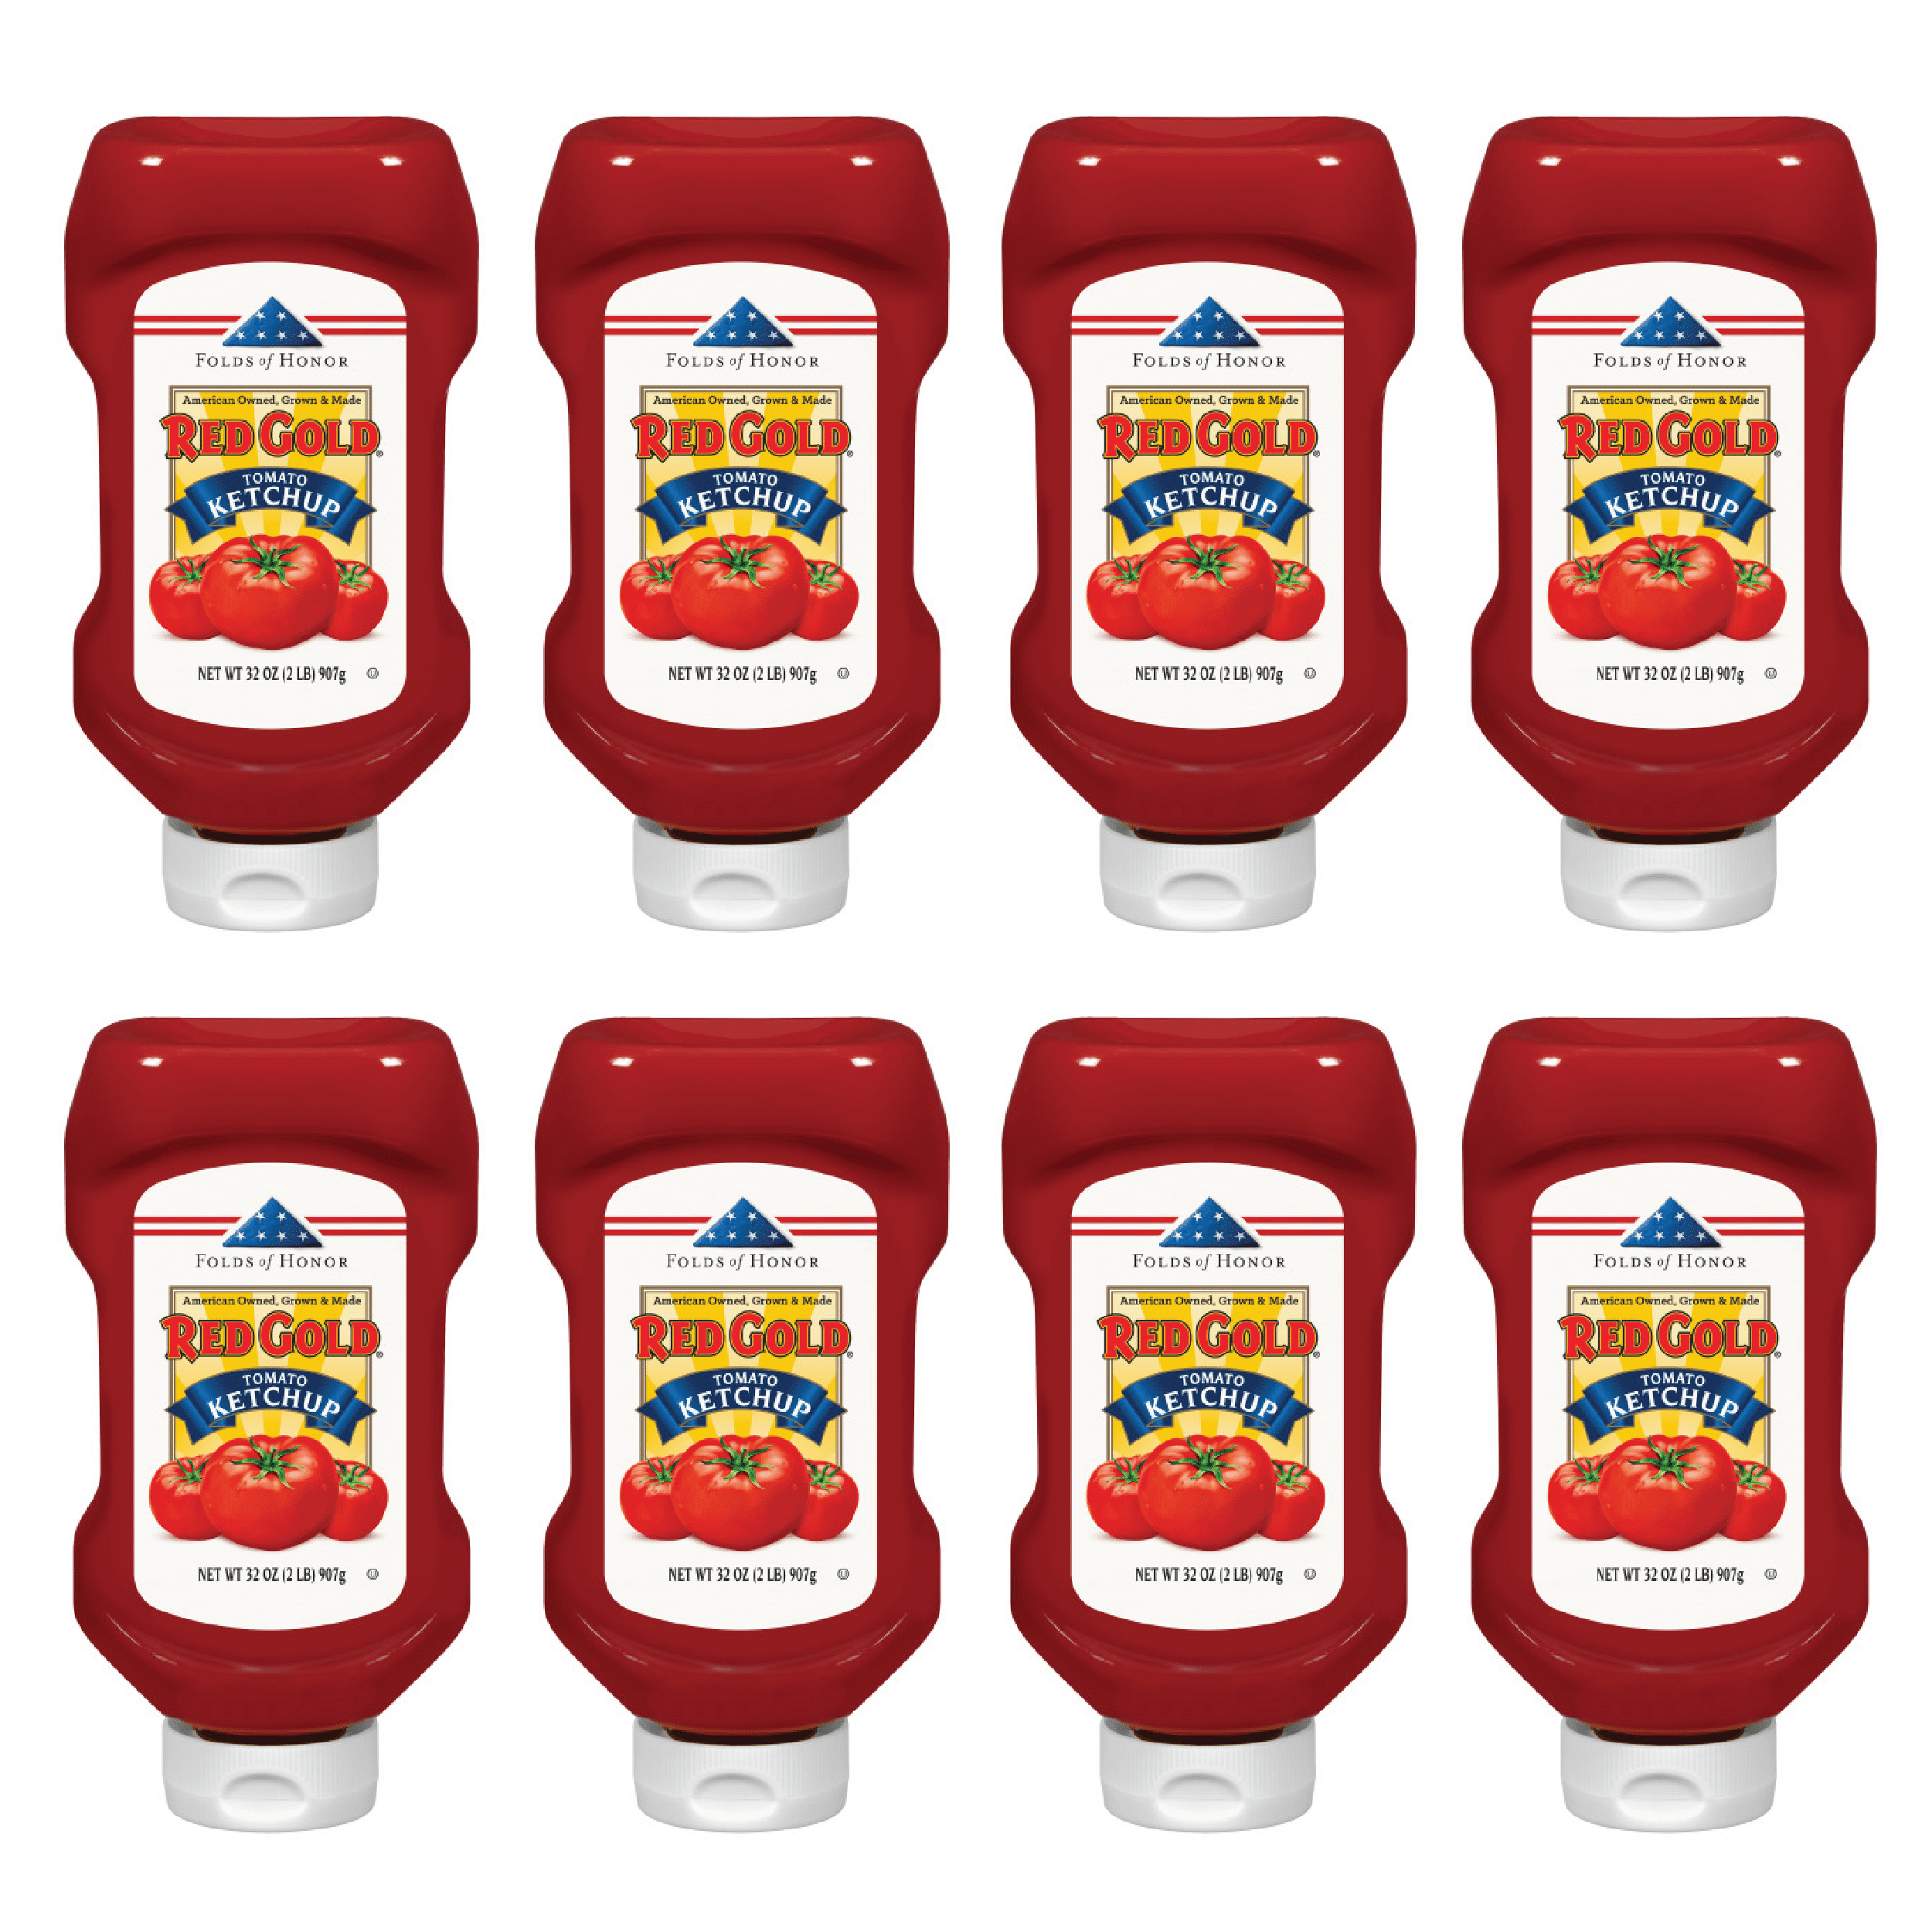 Red Gold and Folds of Honor Tomato Ketchup, Kosher and Gluten Free